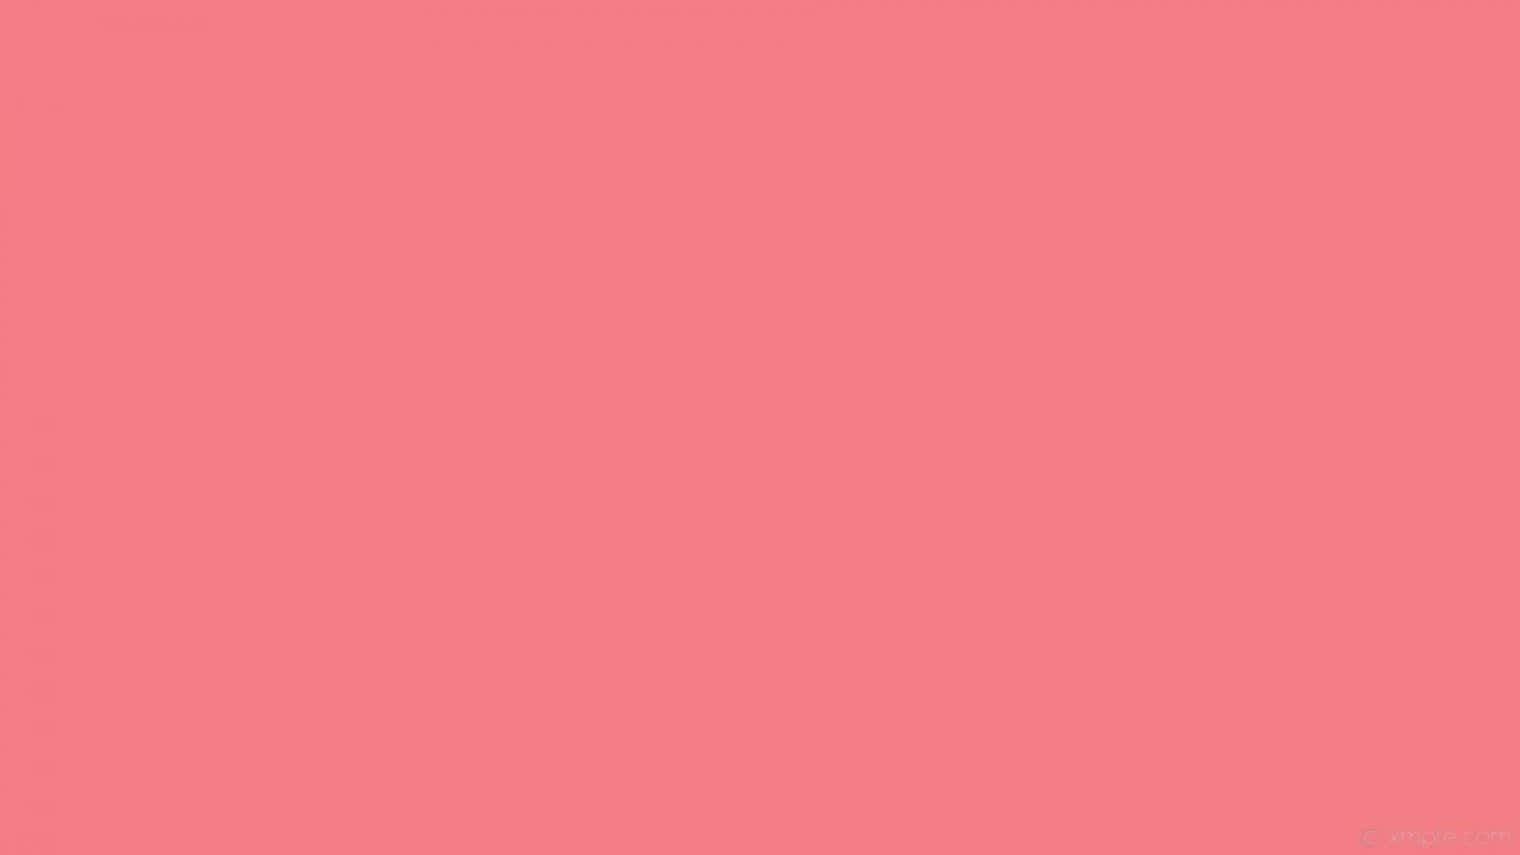 Bold and Vibrant Plain Pink Background